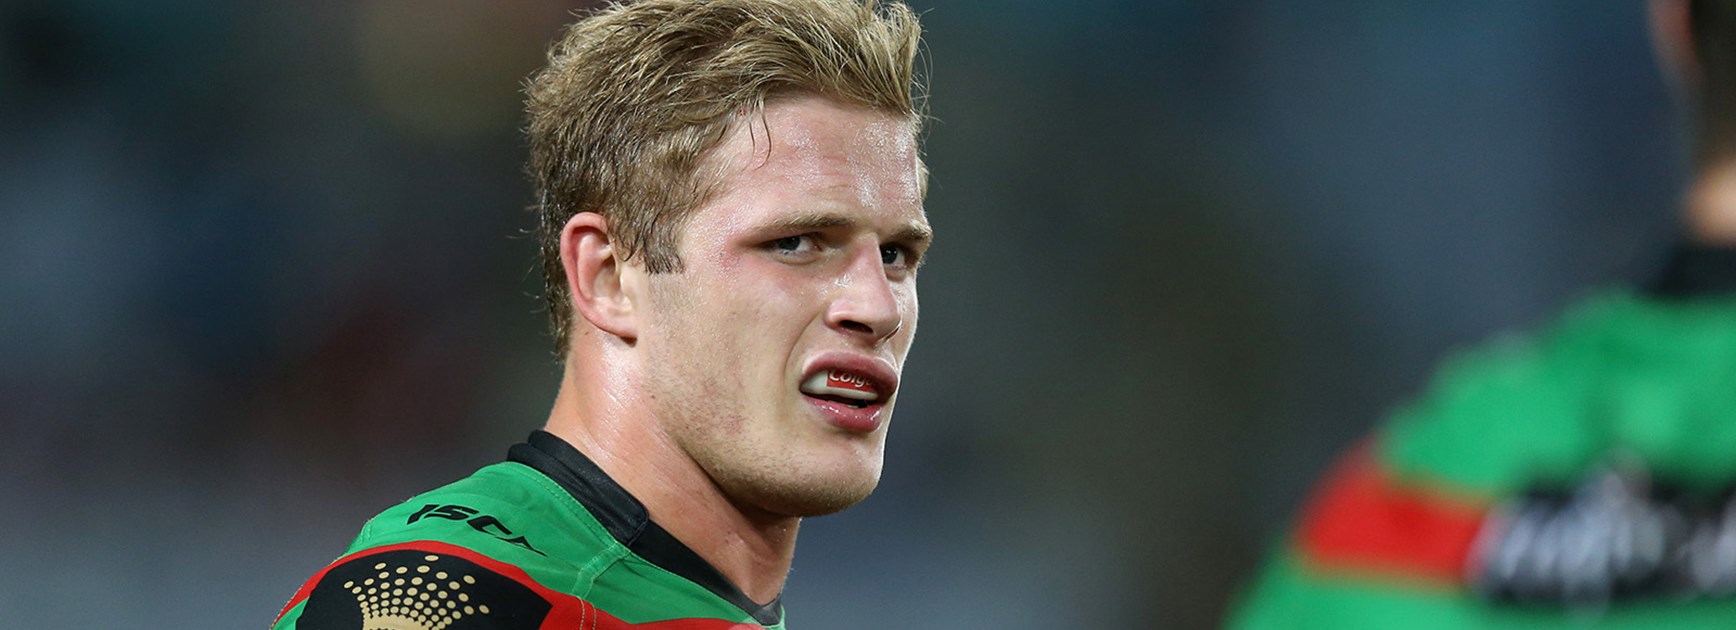 George Burgess was unsuccessful at the NRL Judiciary and will miss two games.